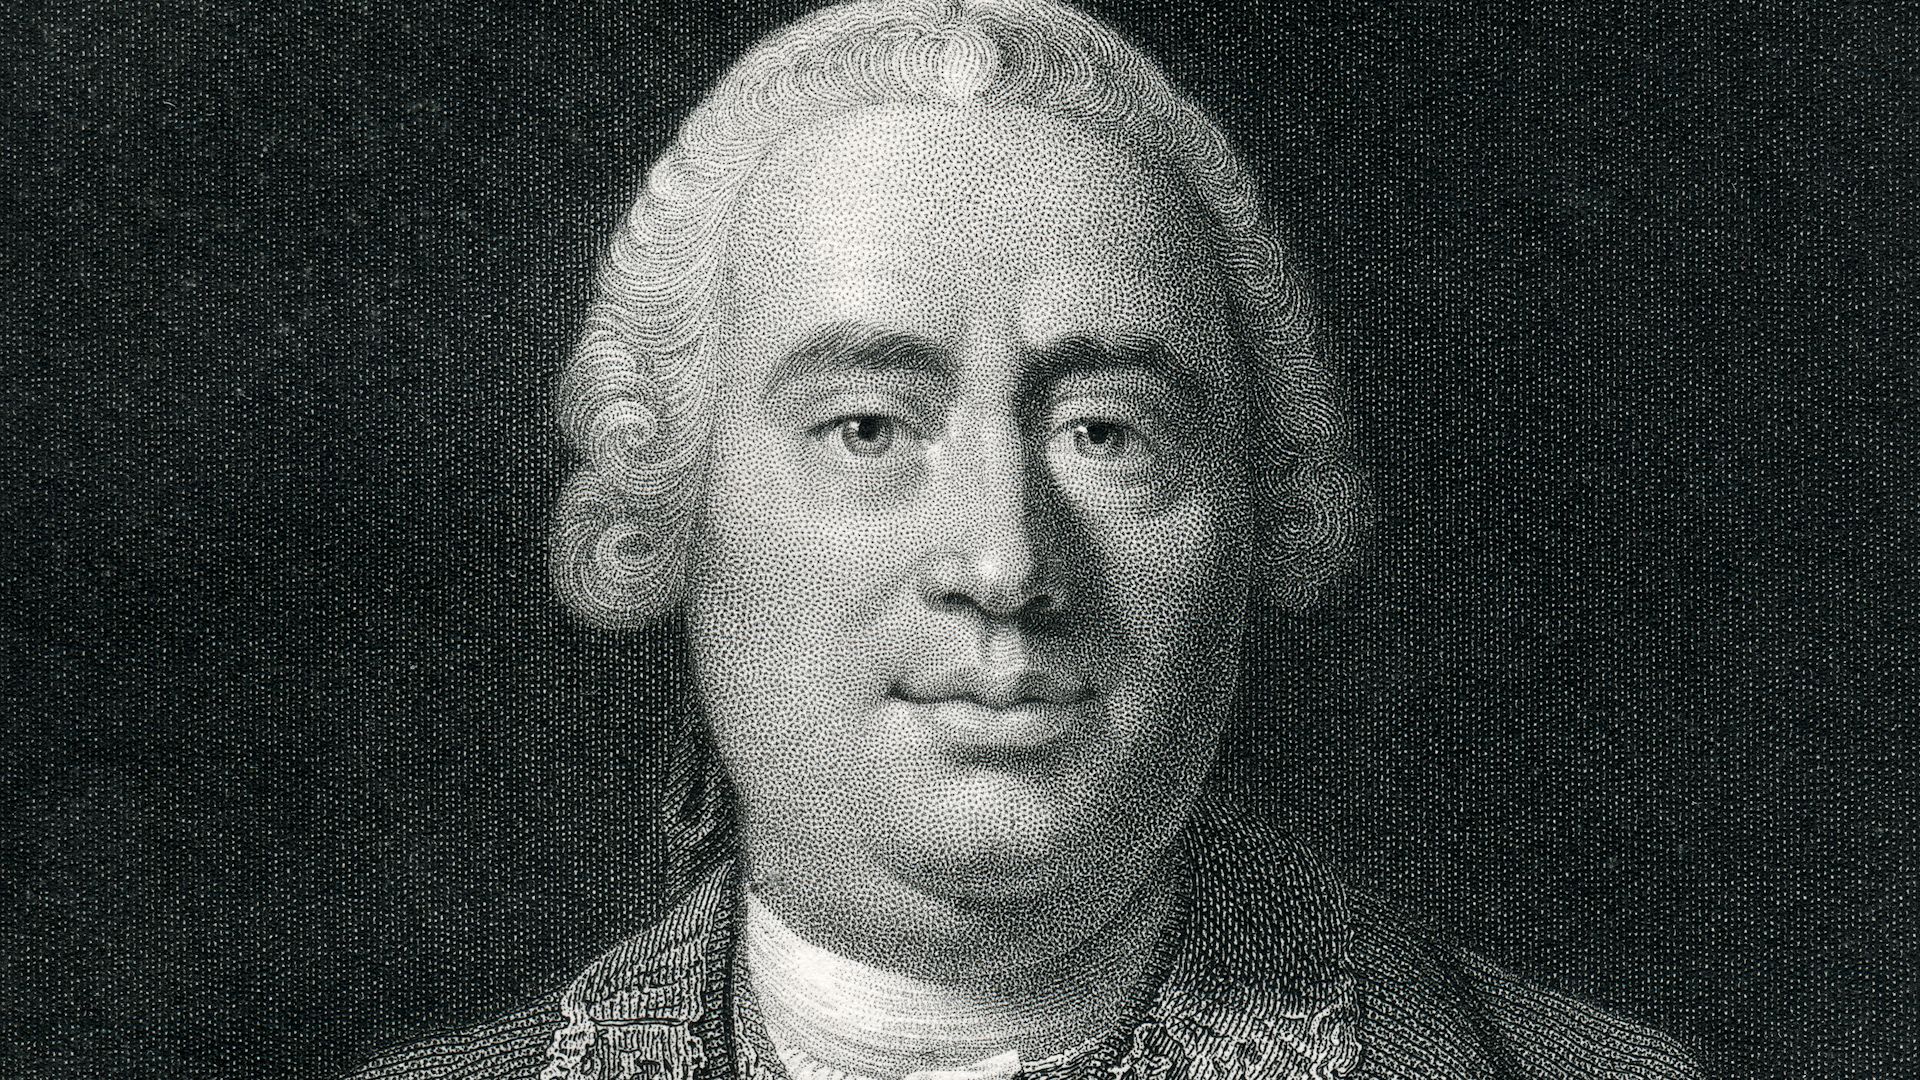 Learn the answers to your questions about David Hume